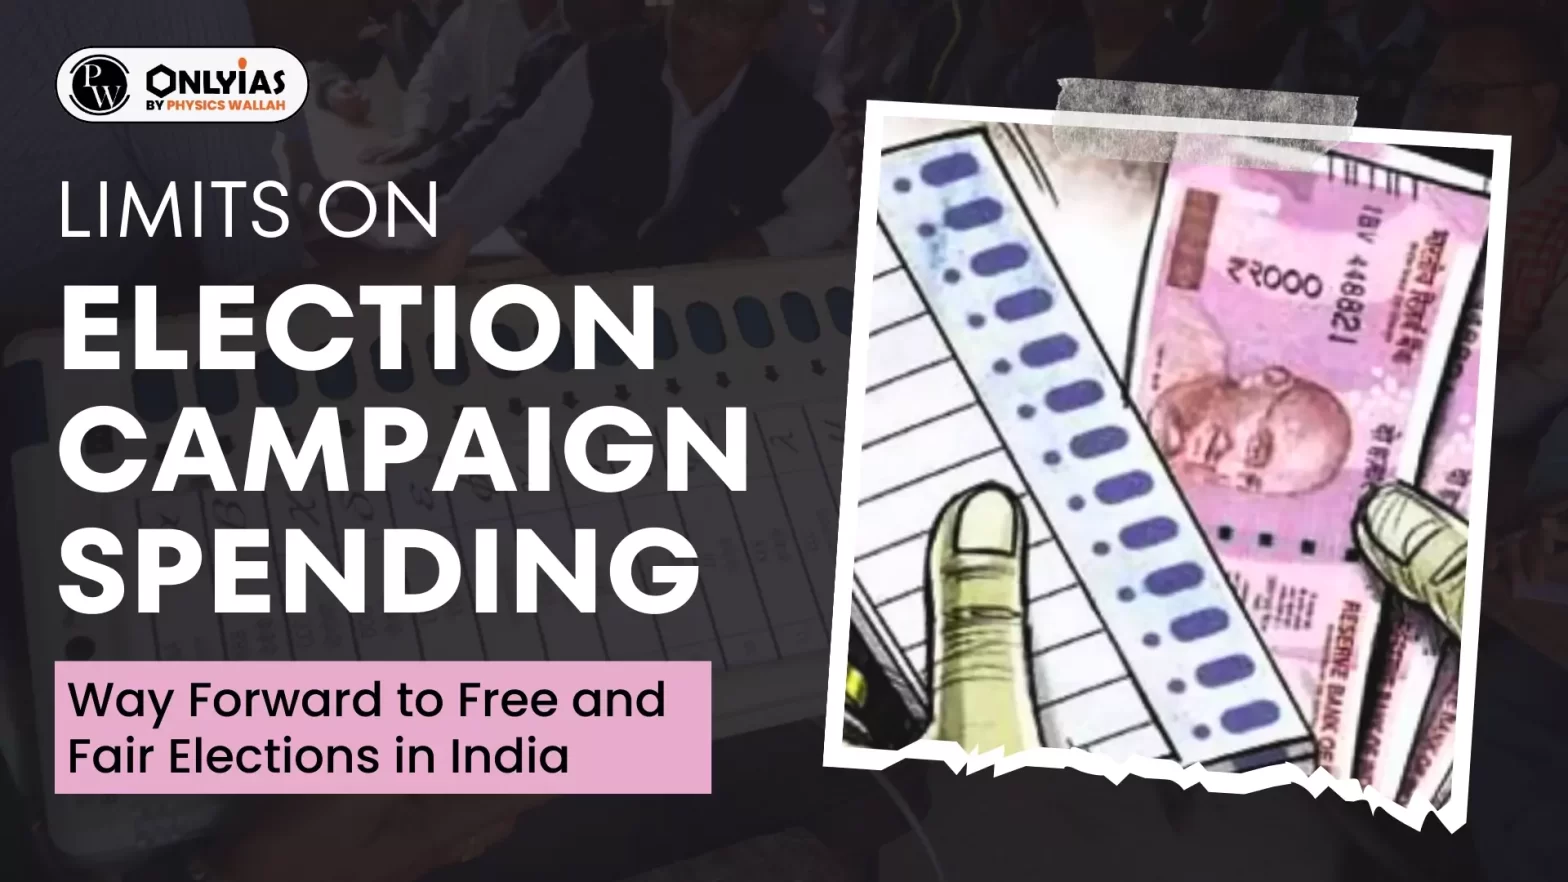 Limits On Election Campaign Spending: Way Forward to Free and Fair Elections in India